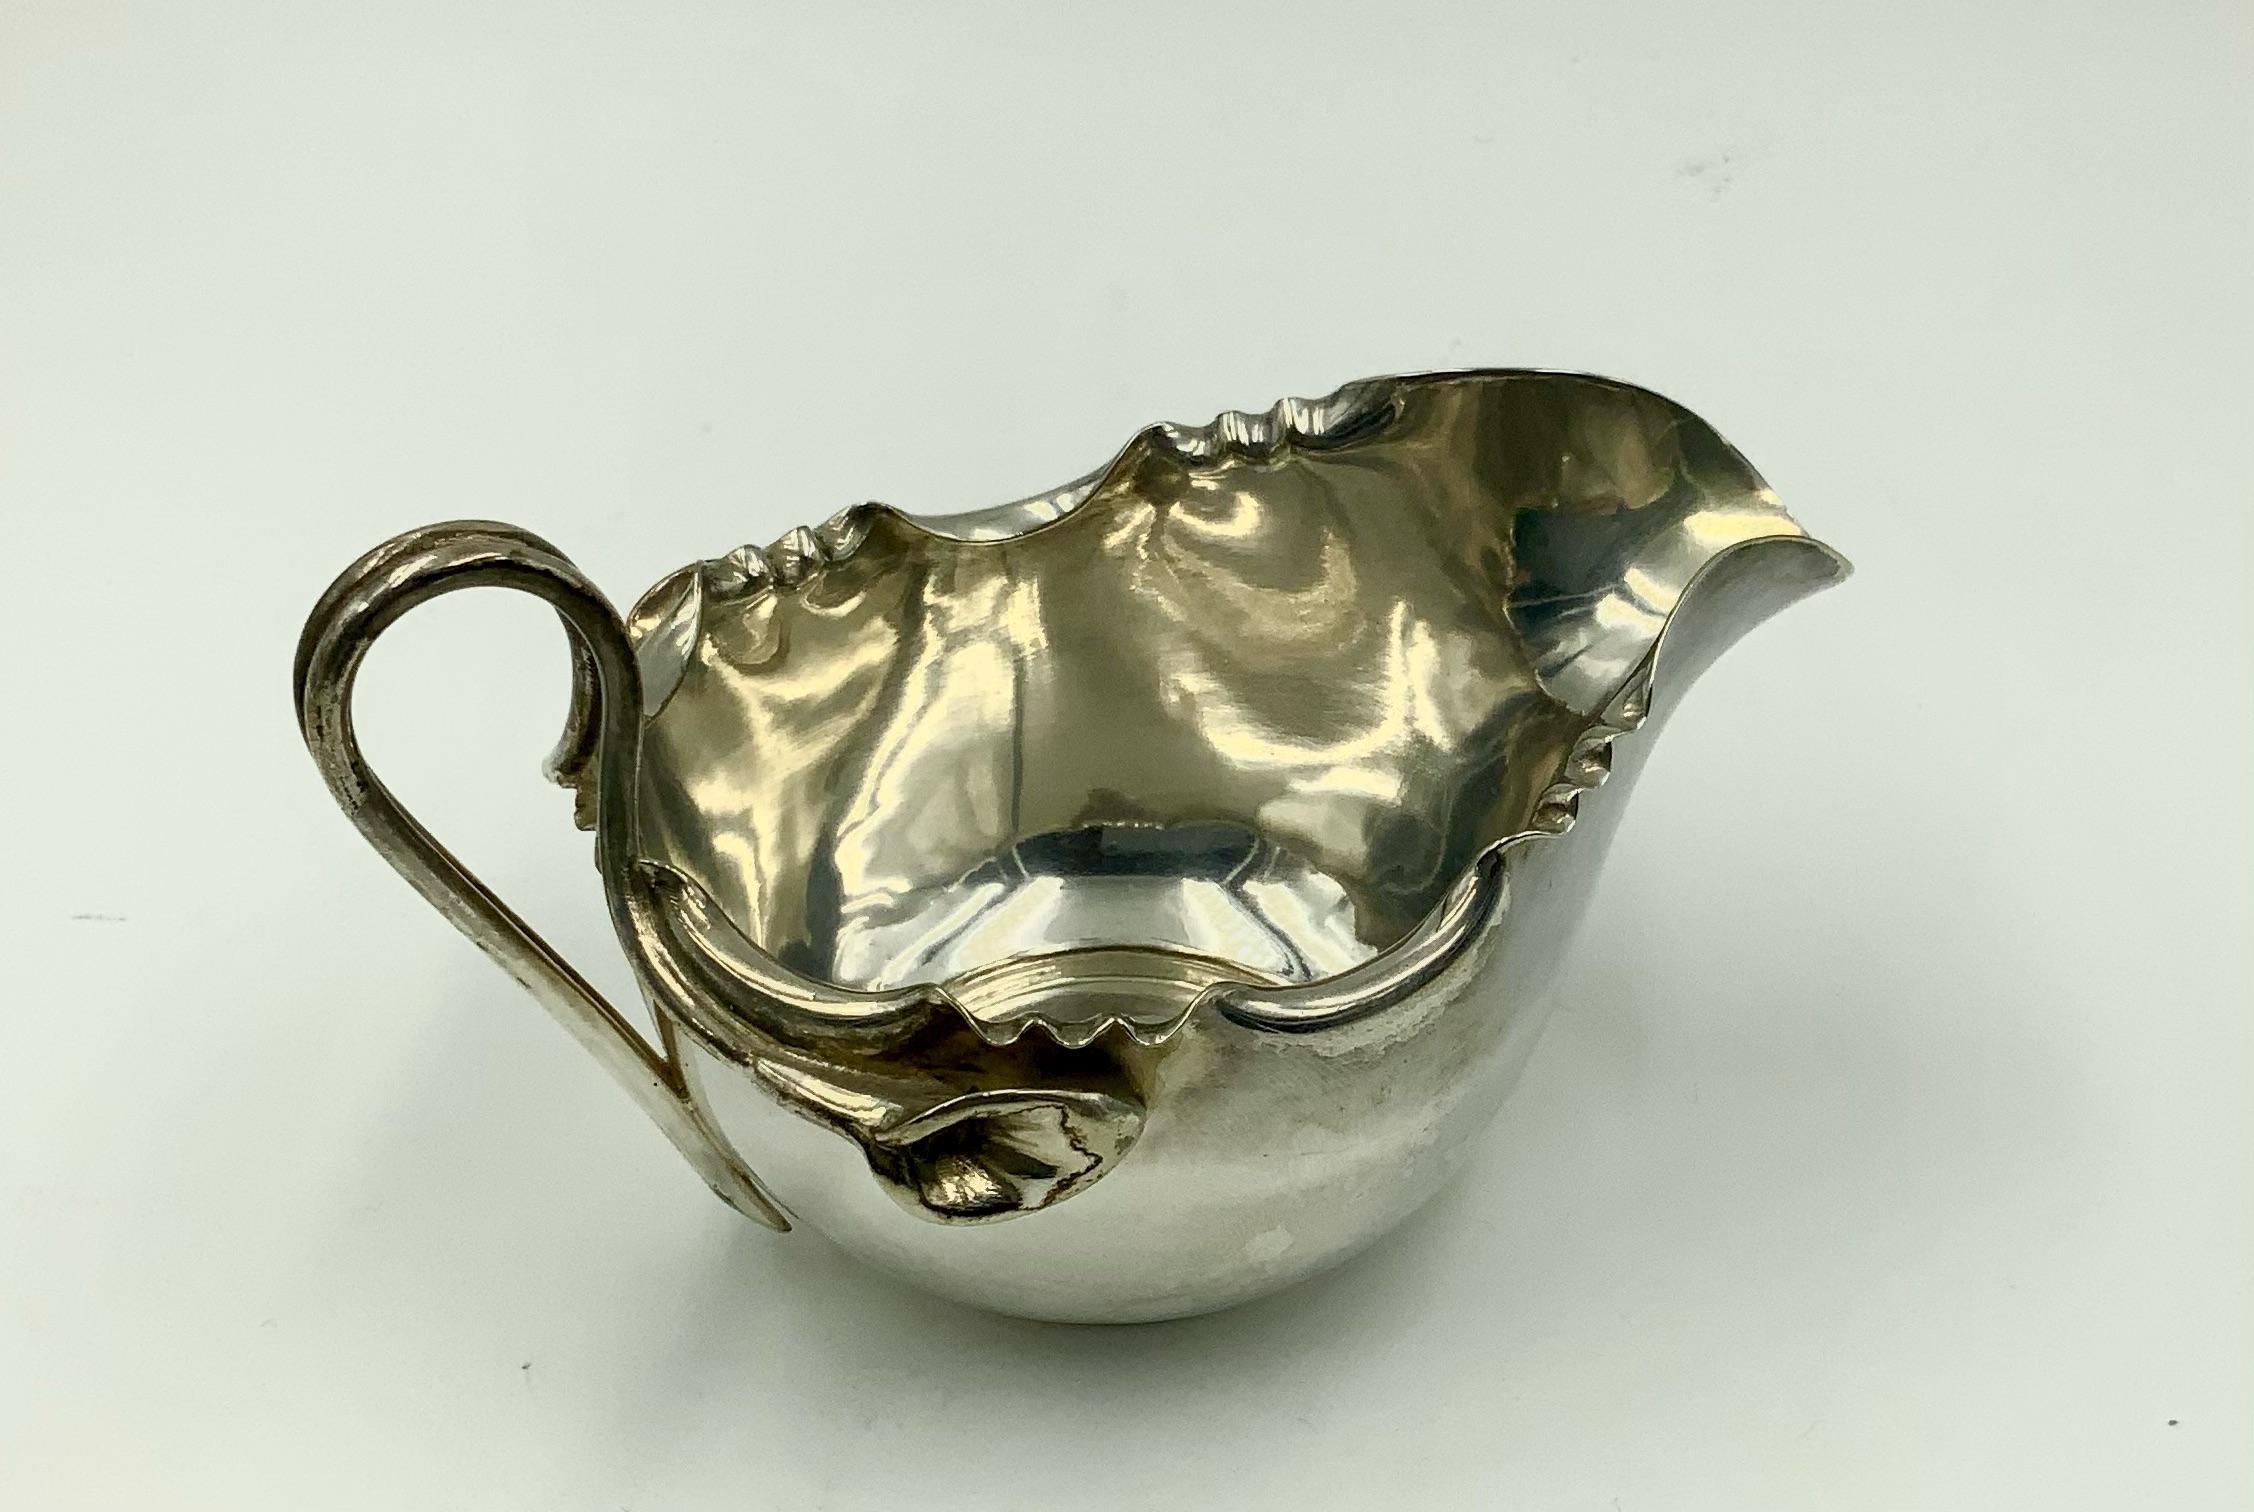 English Art Nouveau Silver Plate Sugar and Creamer in Caddy Tray by James Dixon & Sons